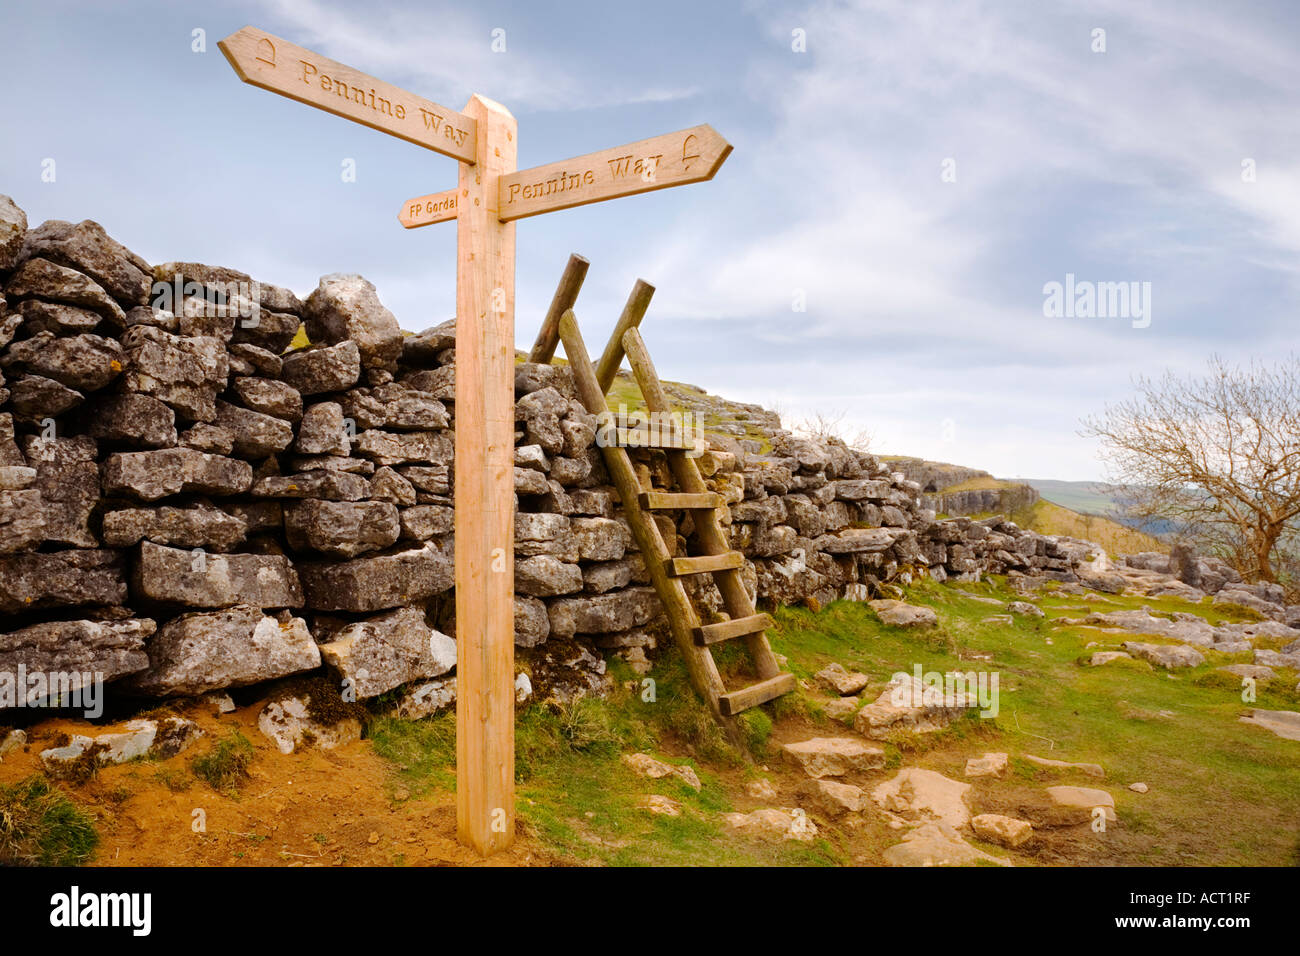 Stock Photo England sign for the Pennine Way at Malham Cove by stile over drystone wall Stock Photo